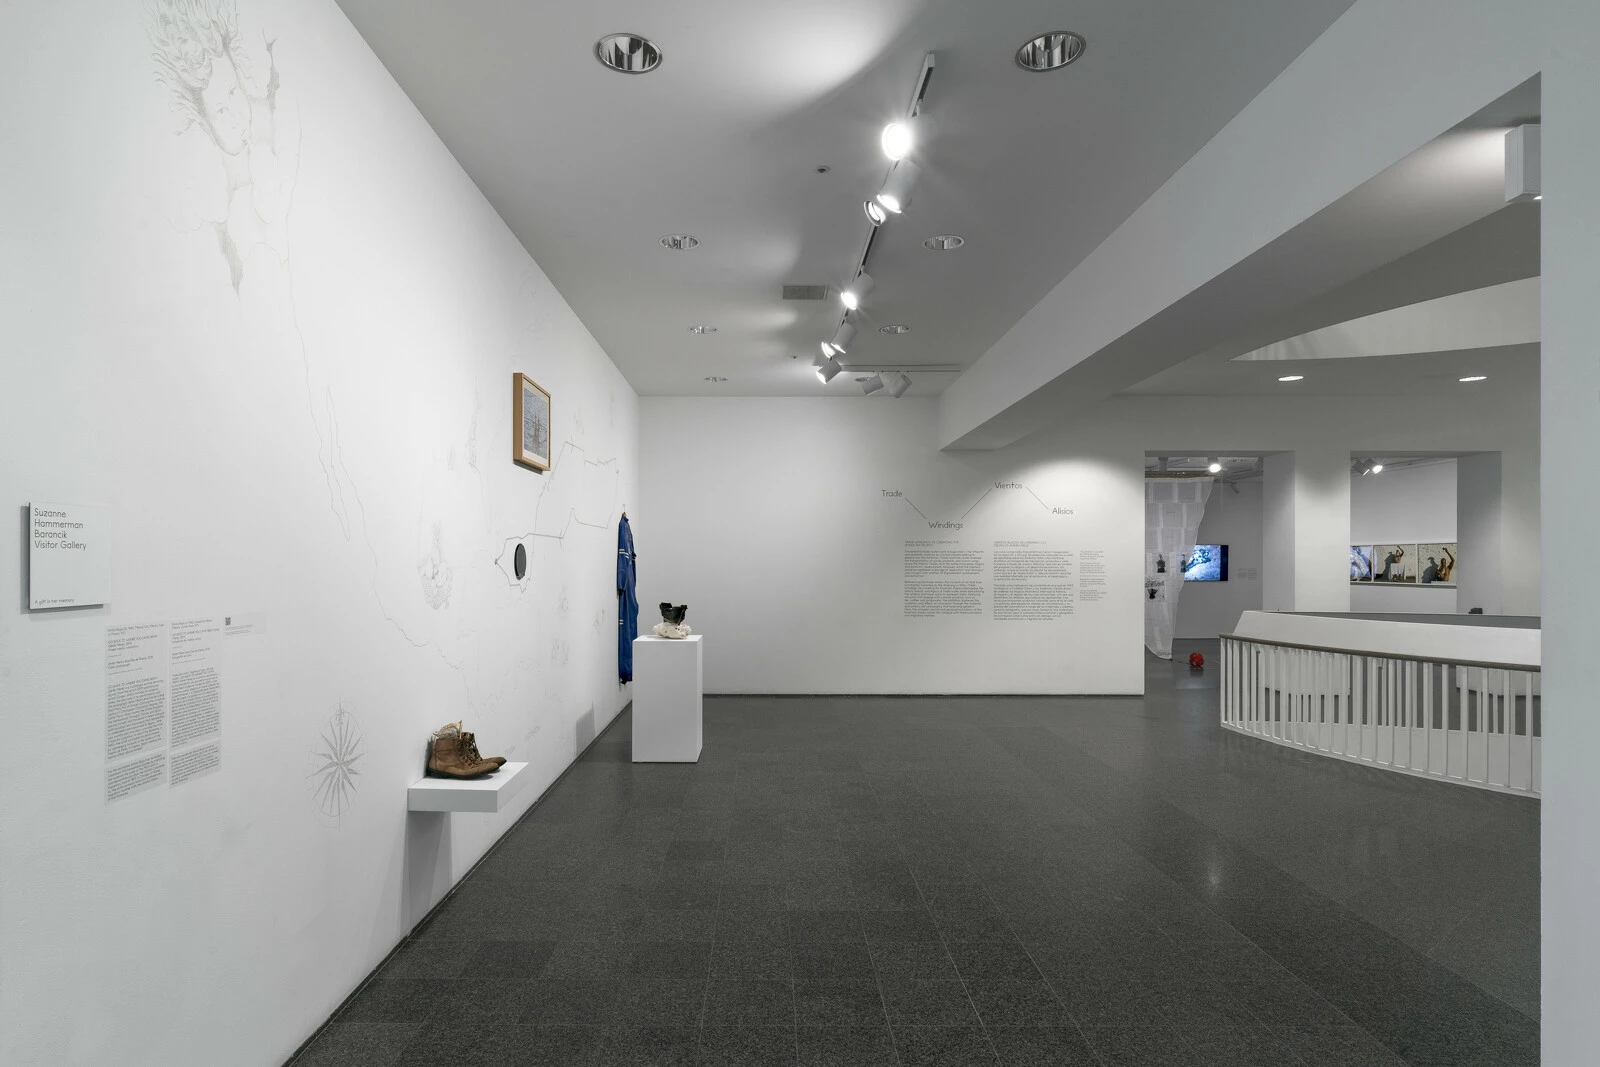 An open gallery space with several objects on the left wall. In the background two doorways lead to another room filled with artworks.